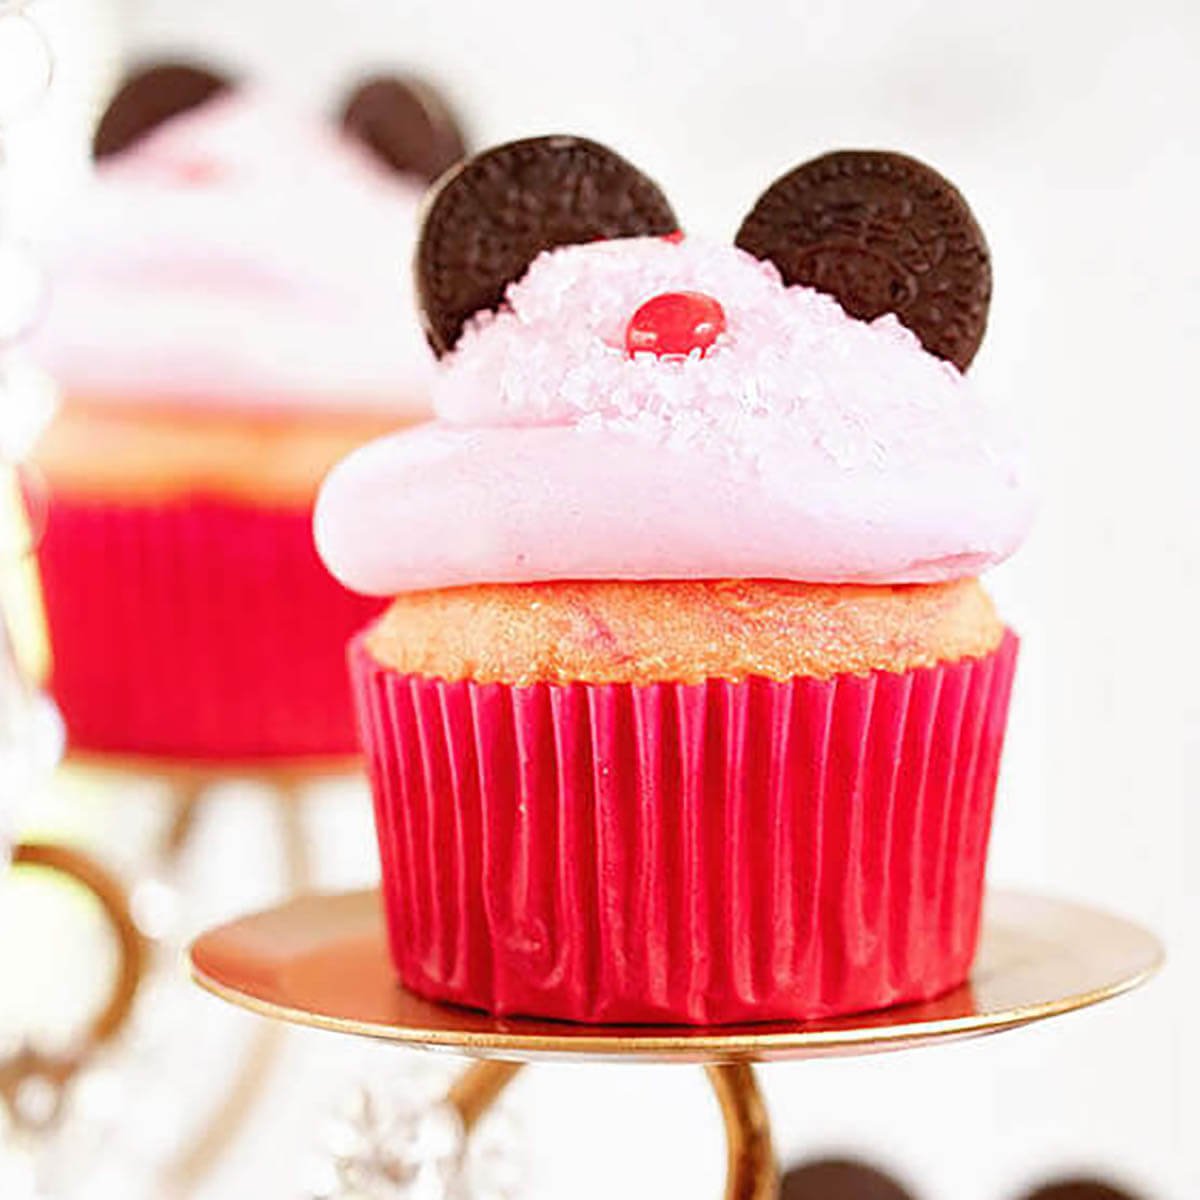 Minnie Mouse cupcakes on a cake stand.